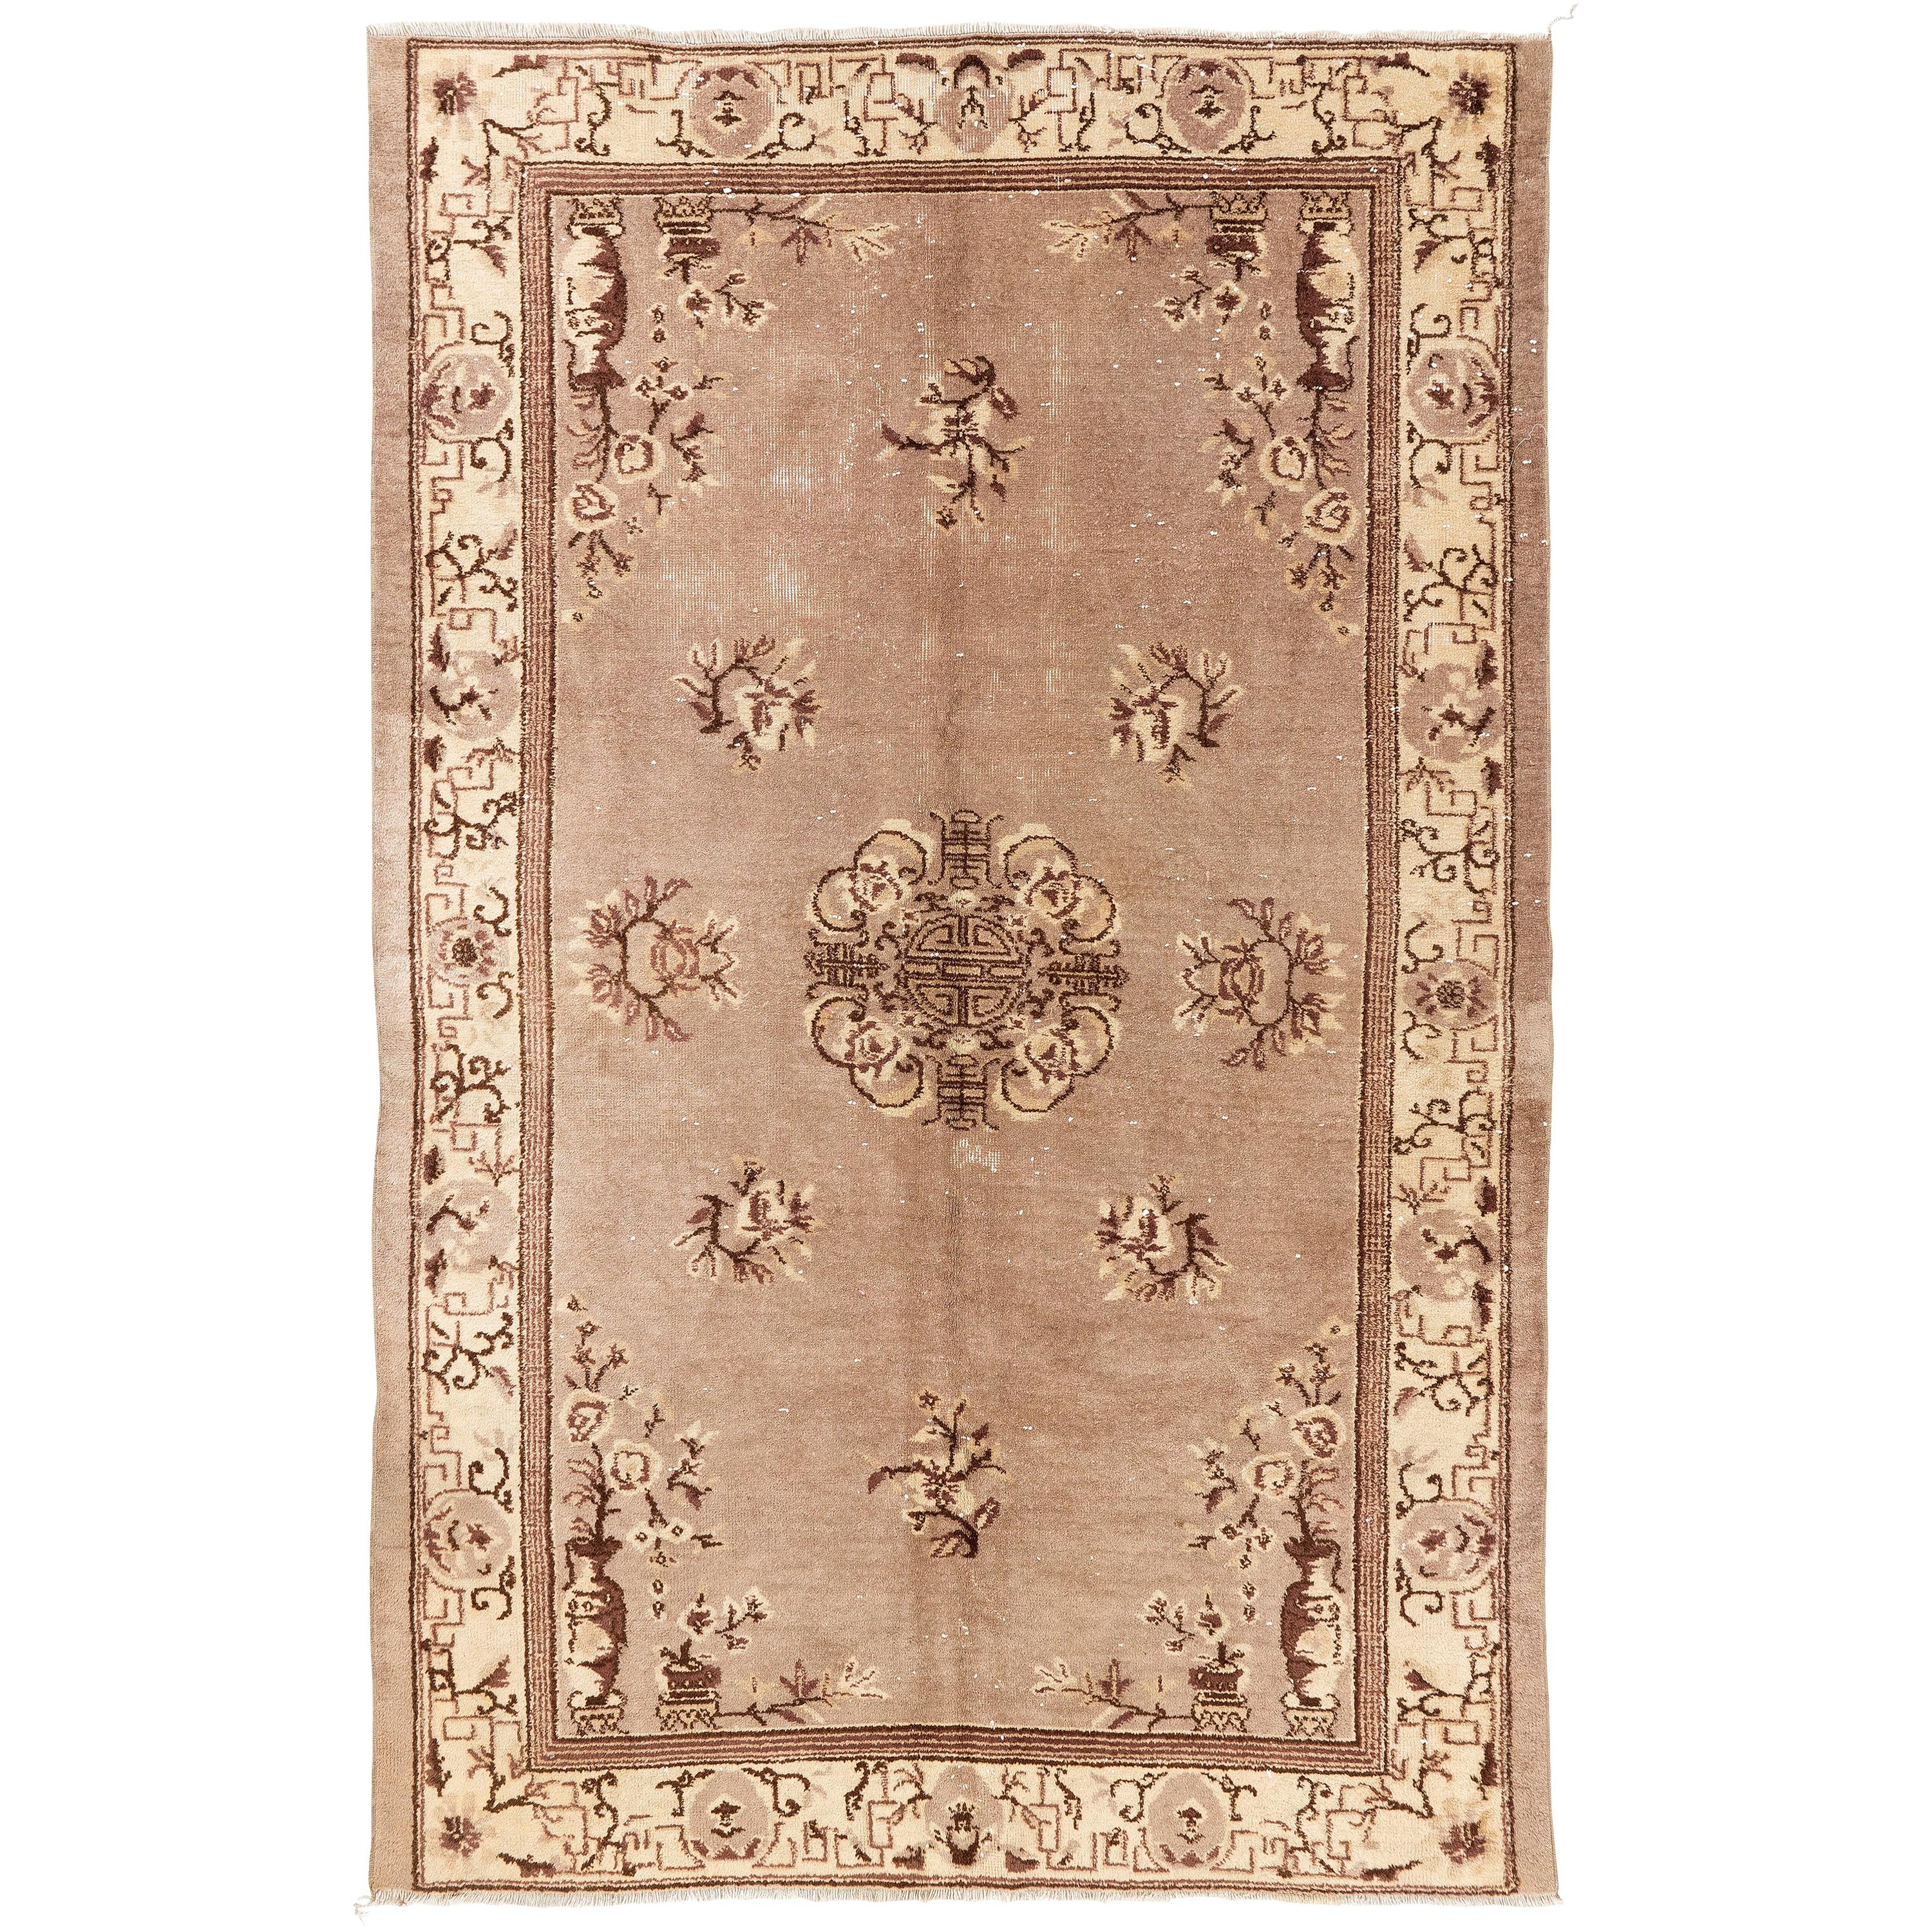 5.2x8 Ft Art Deco Chinese Rug in Soft Faded Taupe, Brown and Beige Colors For Sale